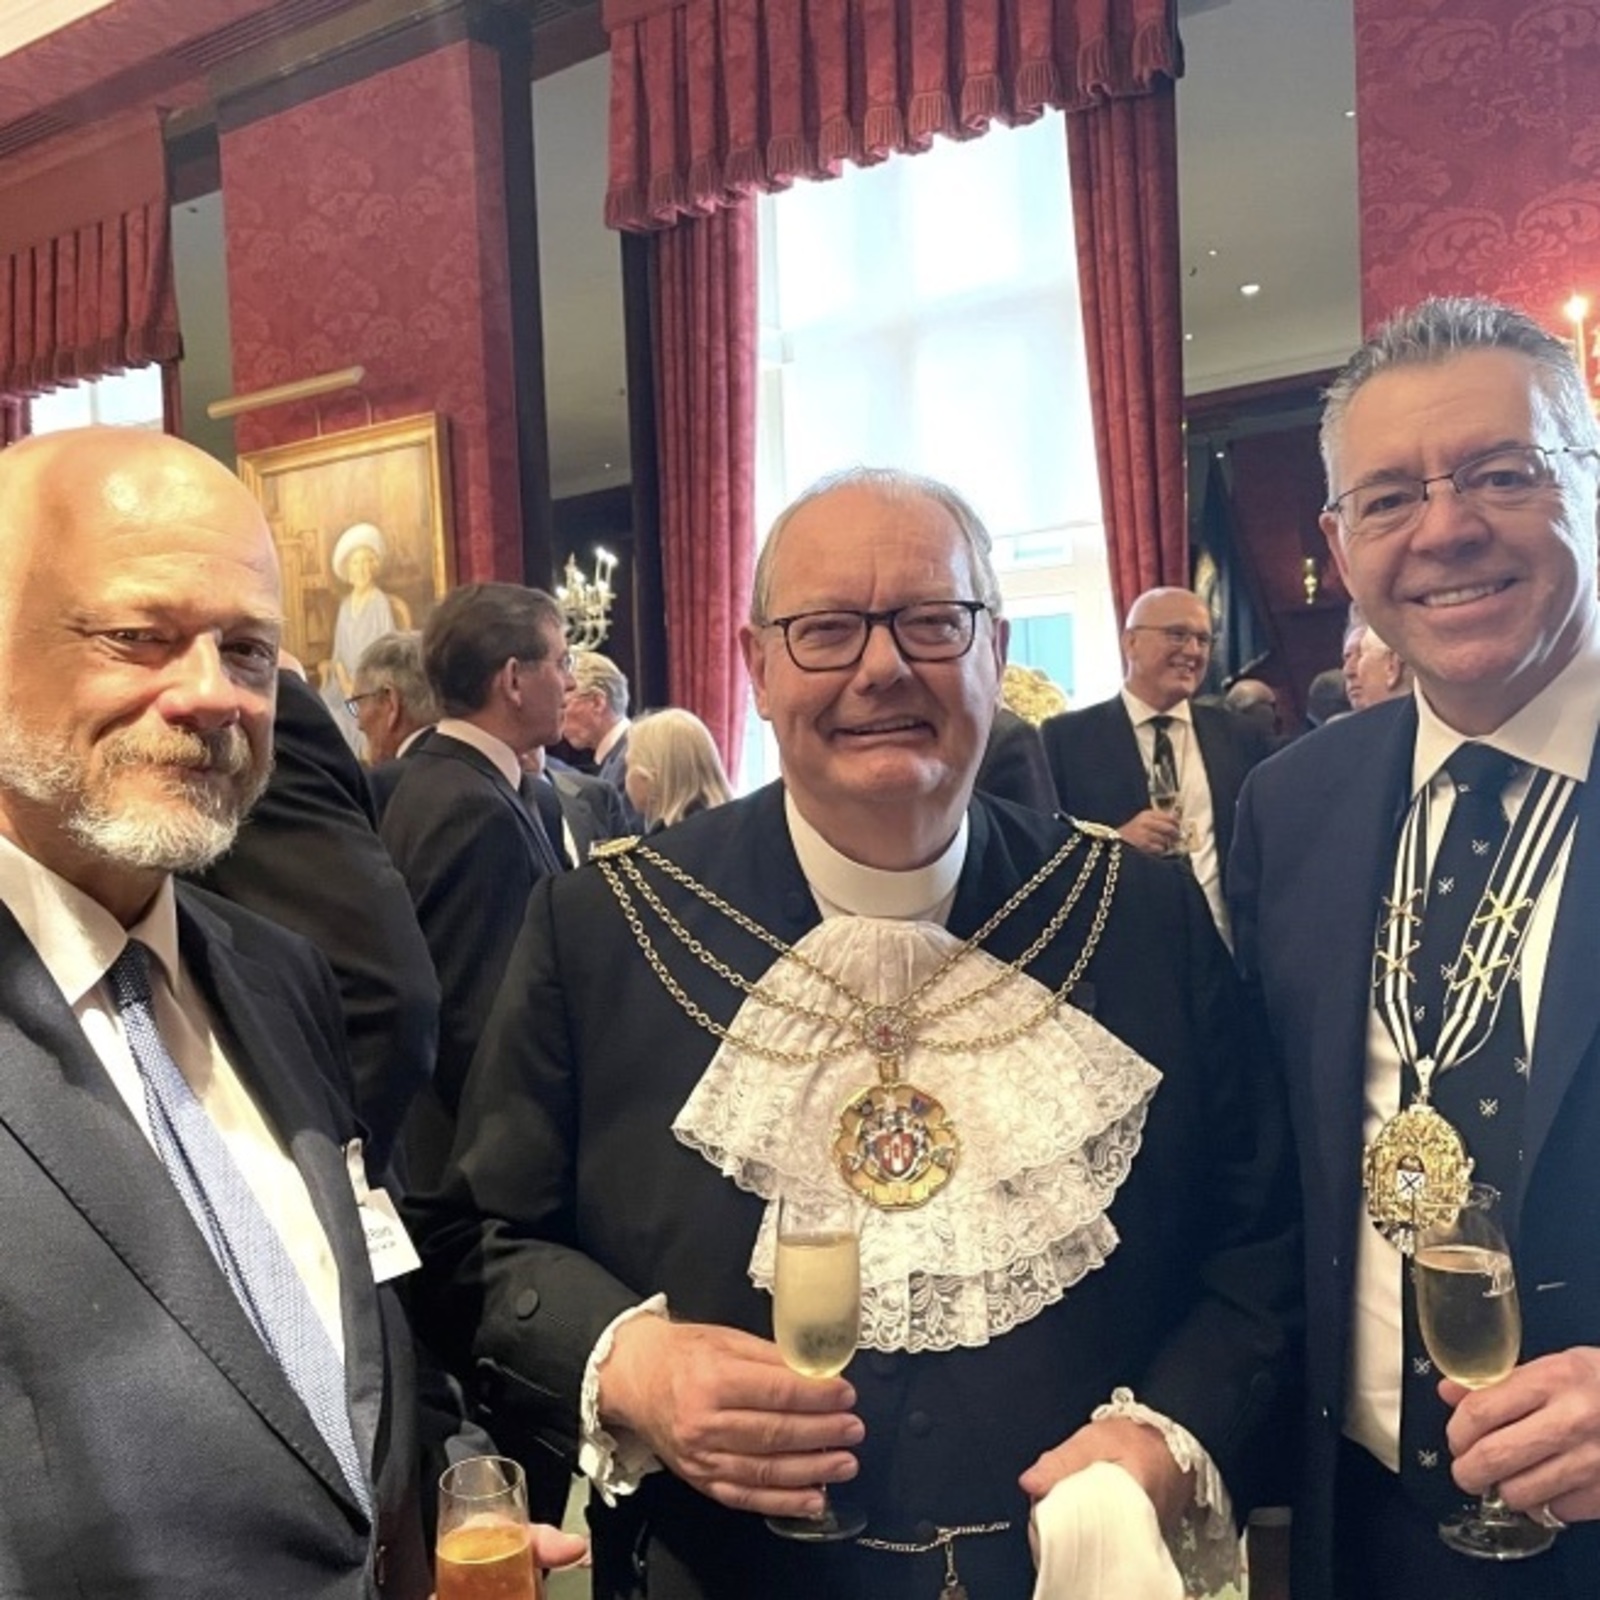 8 June 2023 - So nice to meet up with so many Livery Masters and old friends at The Livery Committee Annual Reception at Grocers Hall.